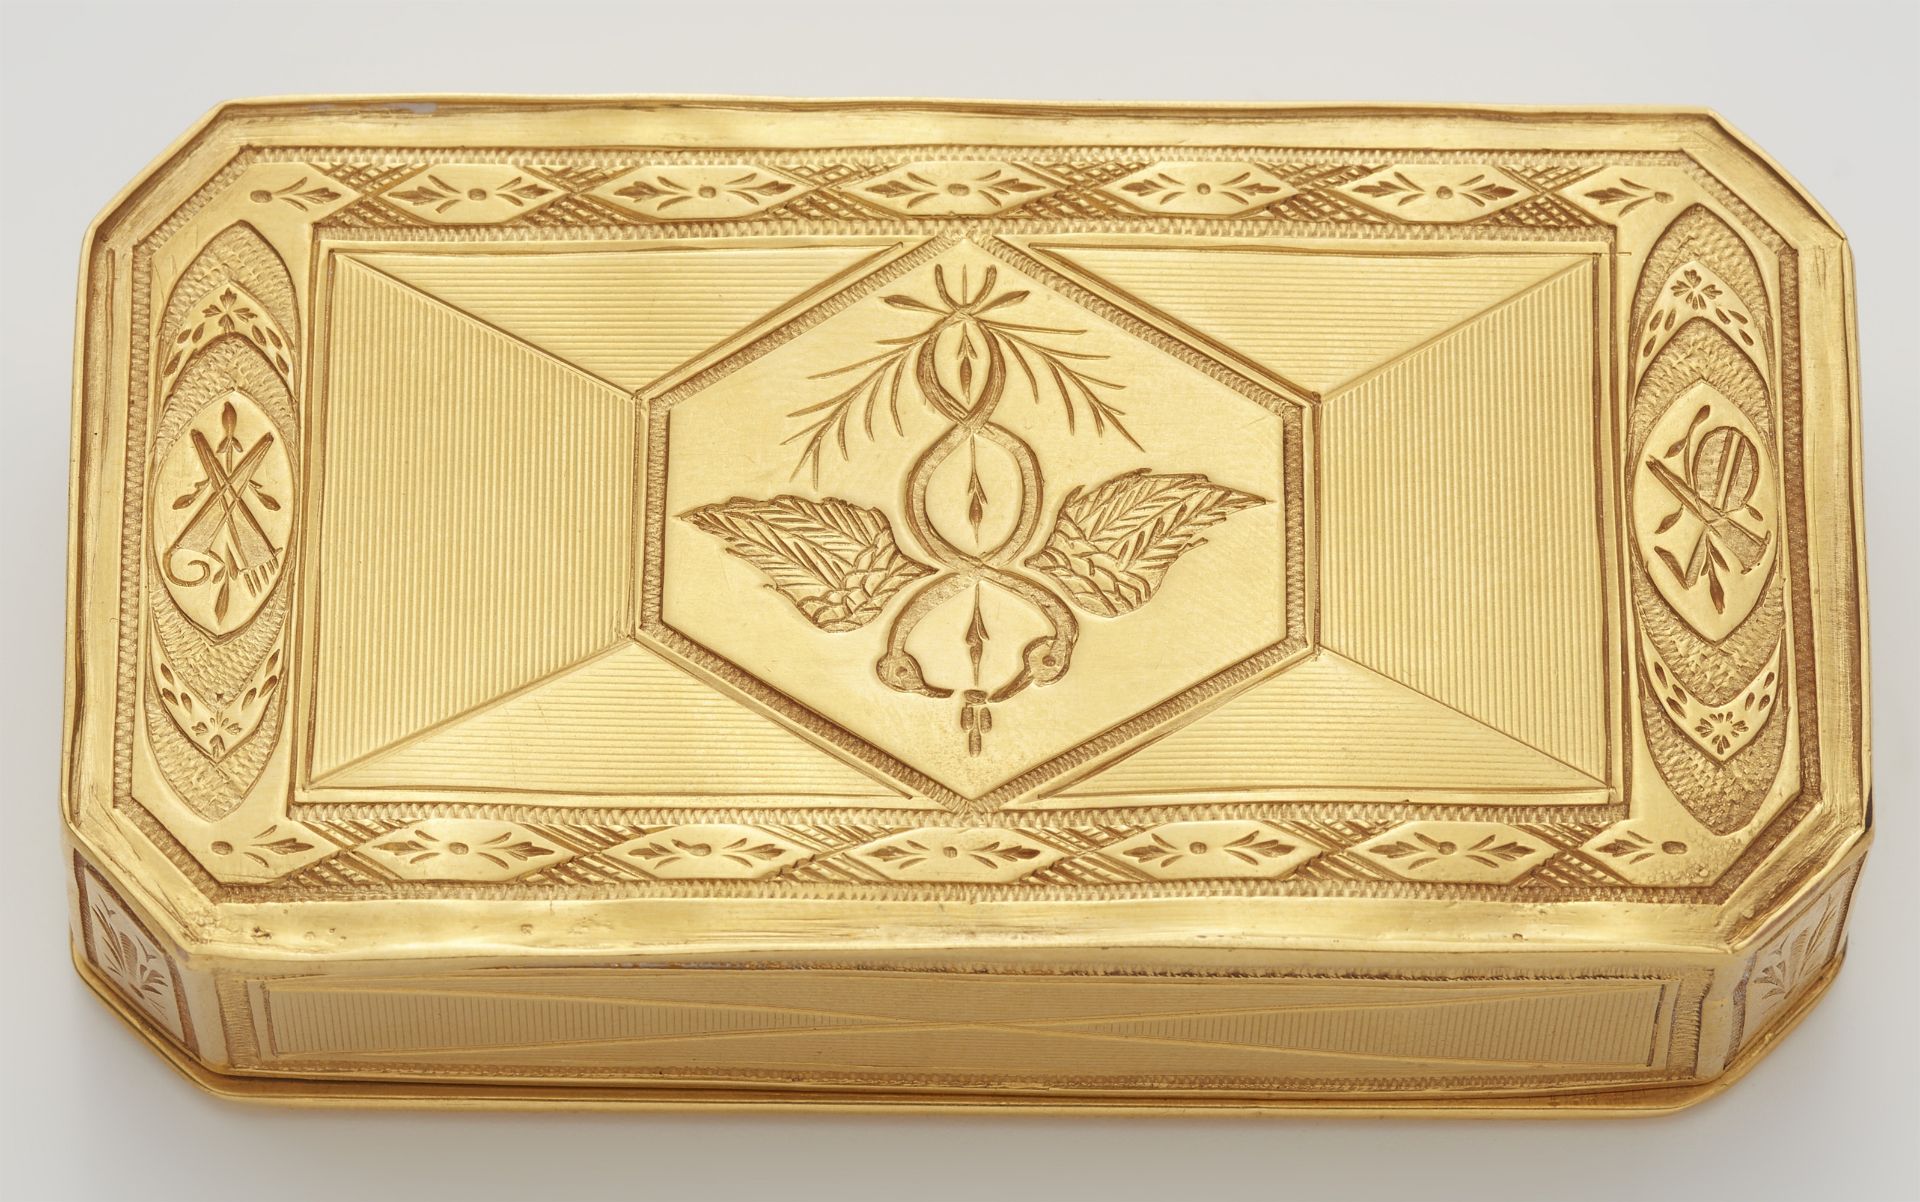 A Neoclassical Galician 20k gold snuffbox. - Image 3 of 6